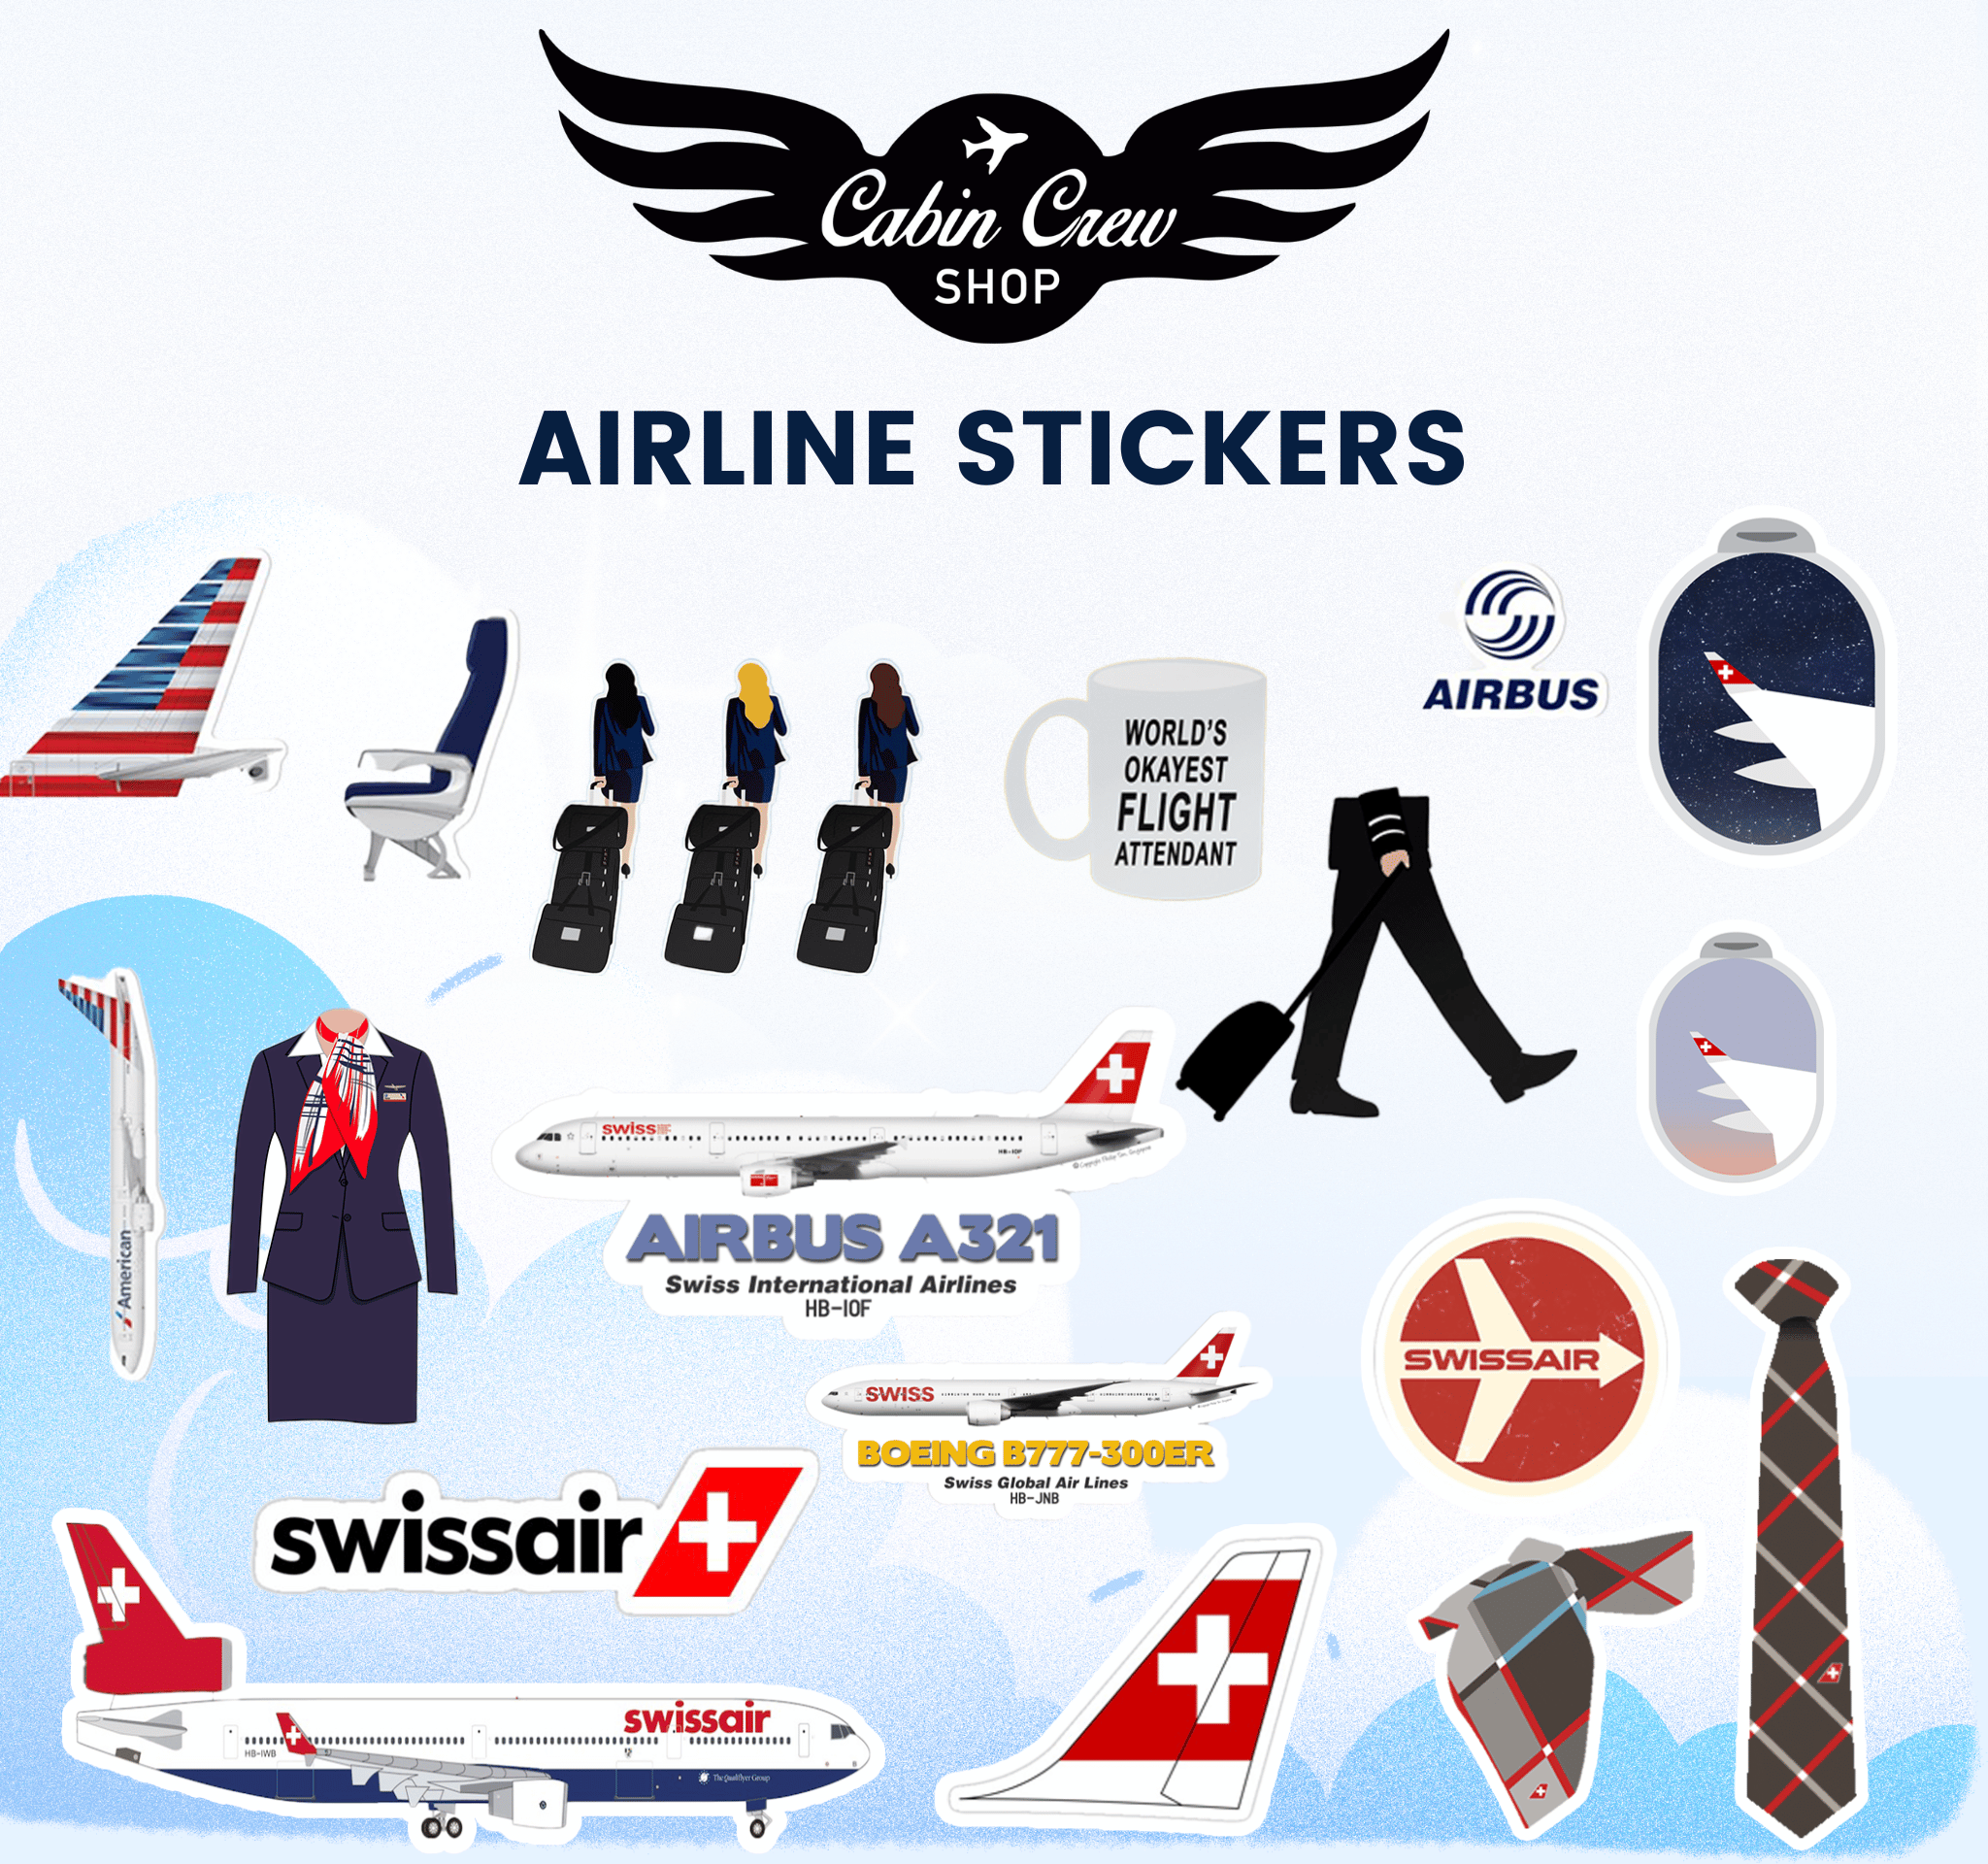 Airline Stickers